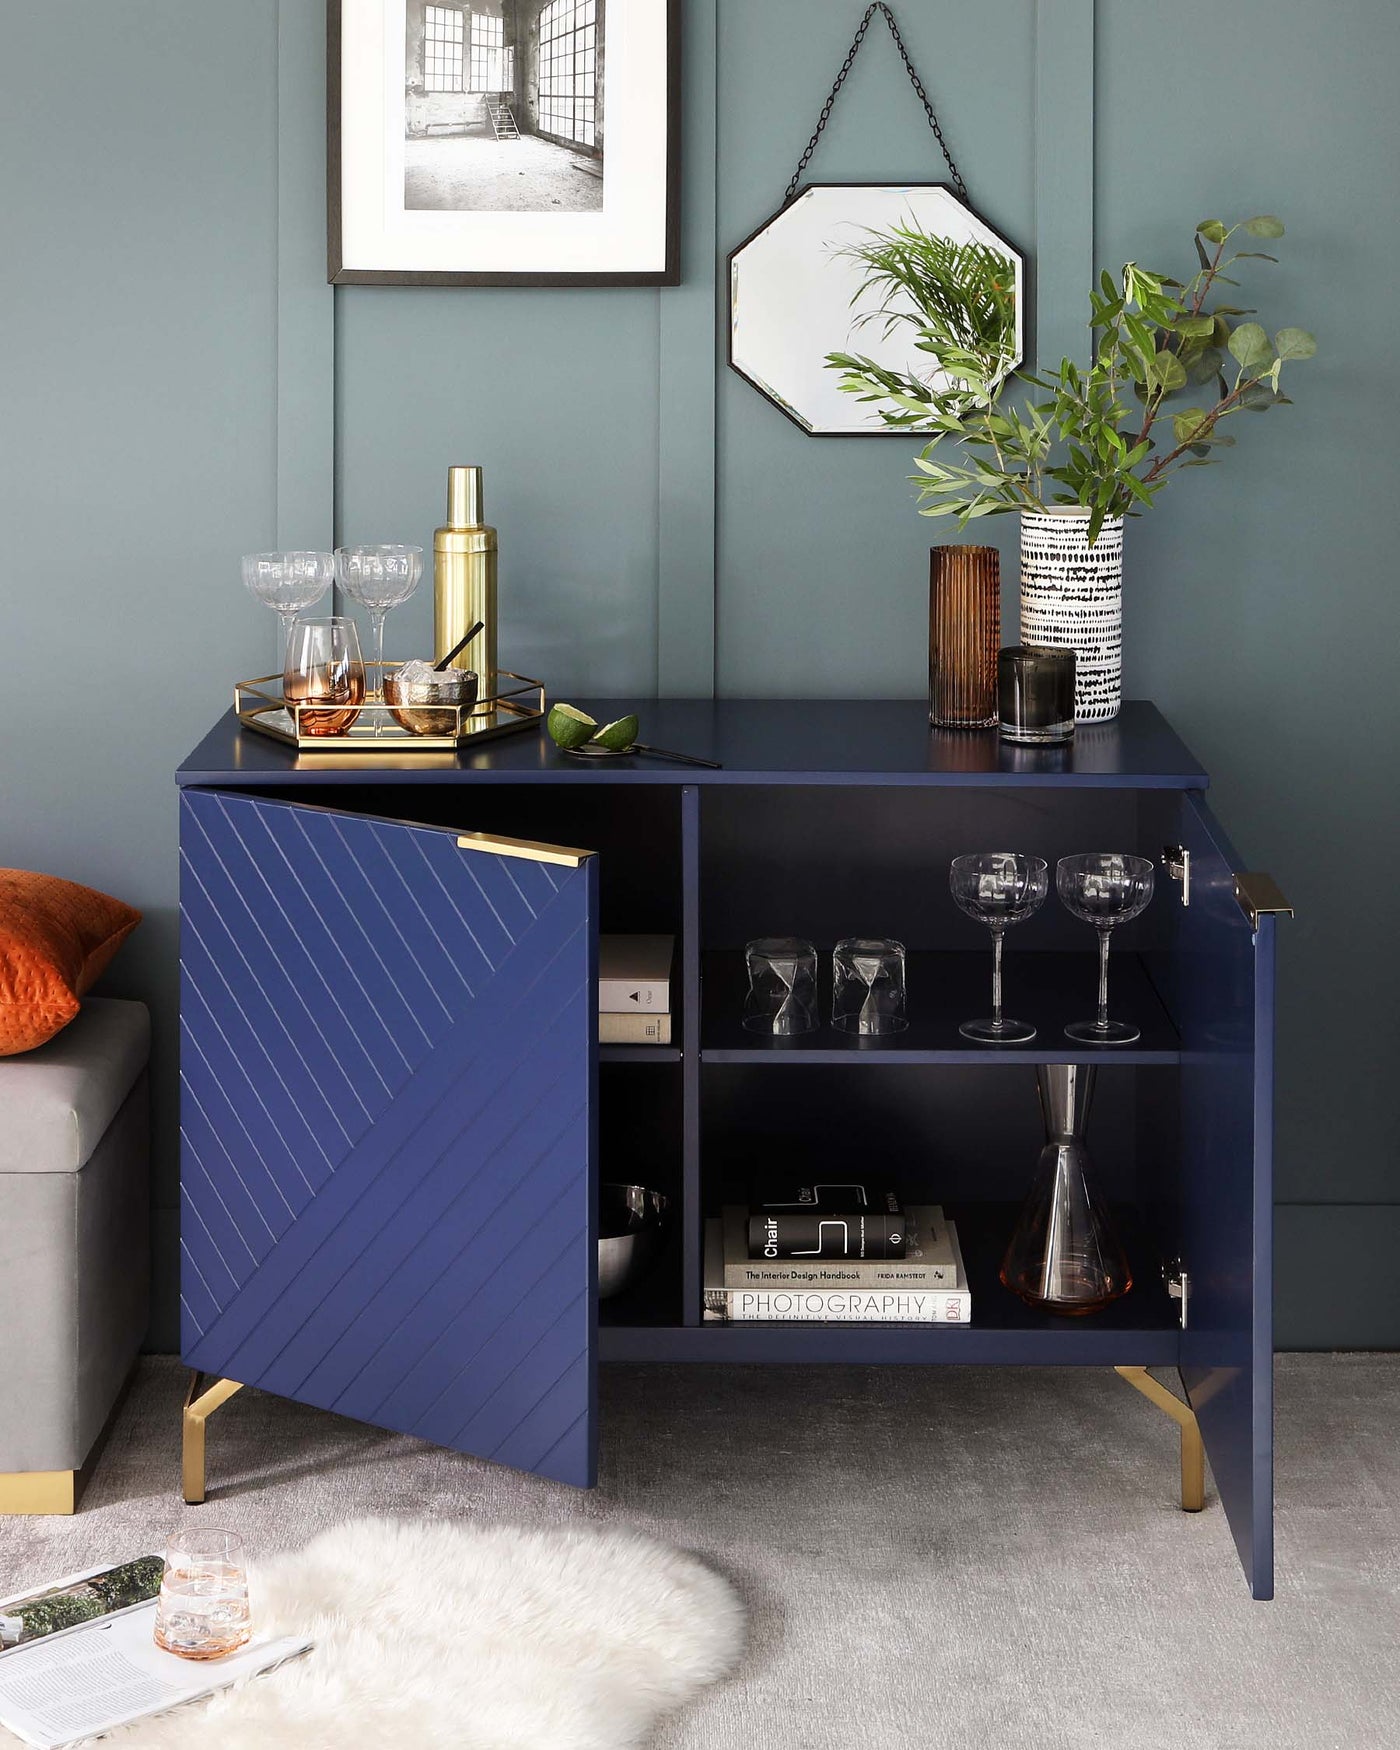 Modern navy blue bar cabinet with gold accents and chevron pattern on the front door, featuring an open shelf with books and glassware, and a closed compartment. Elegant metal legs support the structure. The cabinet is accessorized with a cocktail mixing set on a tray, a decorative vase with greenery, and a framed picture and hexagonal mirror adorn the wall above it.